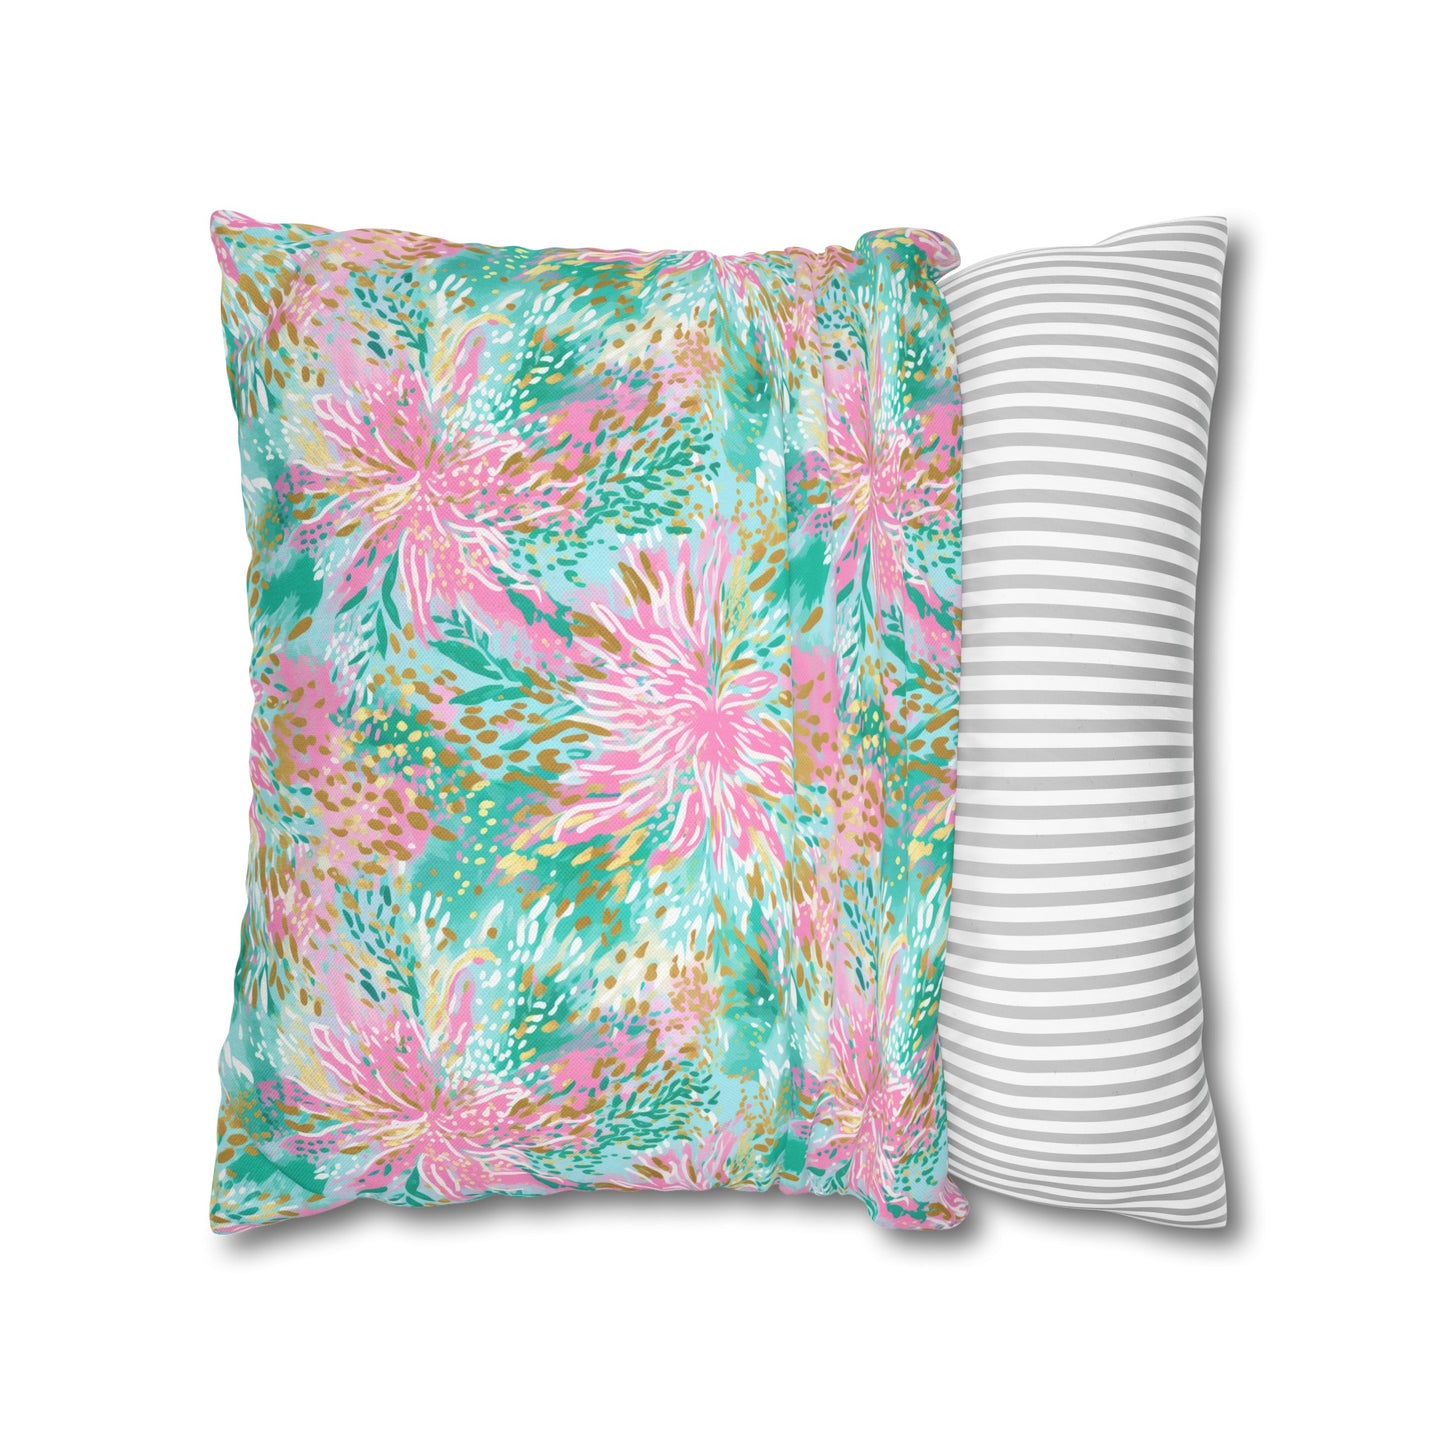 Soft Petal Symphony: Pastel Pink and Green Watercolor Flower Bursts Spun Polyester Square Pillowcase 4 Sizes